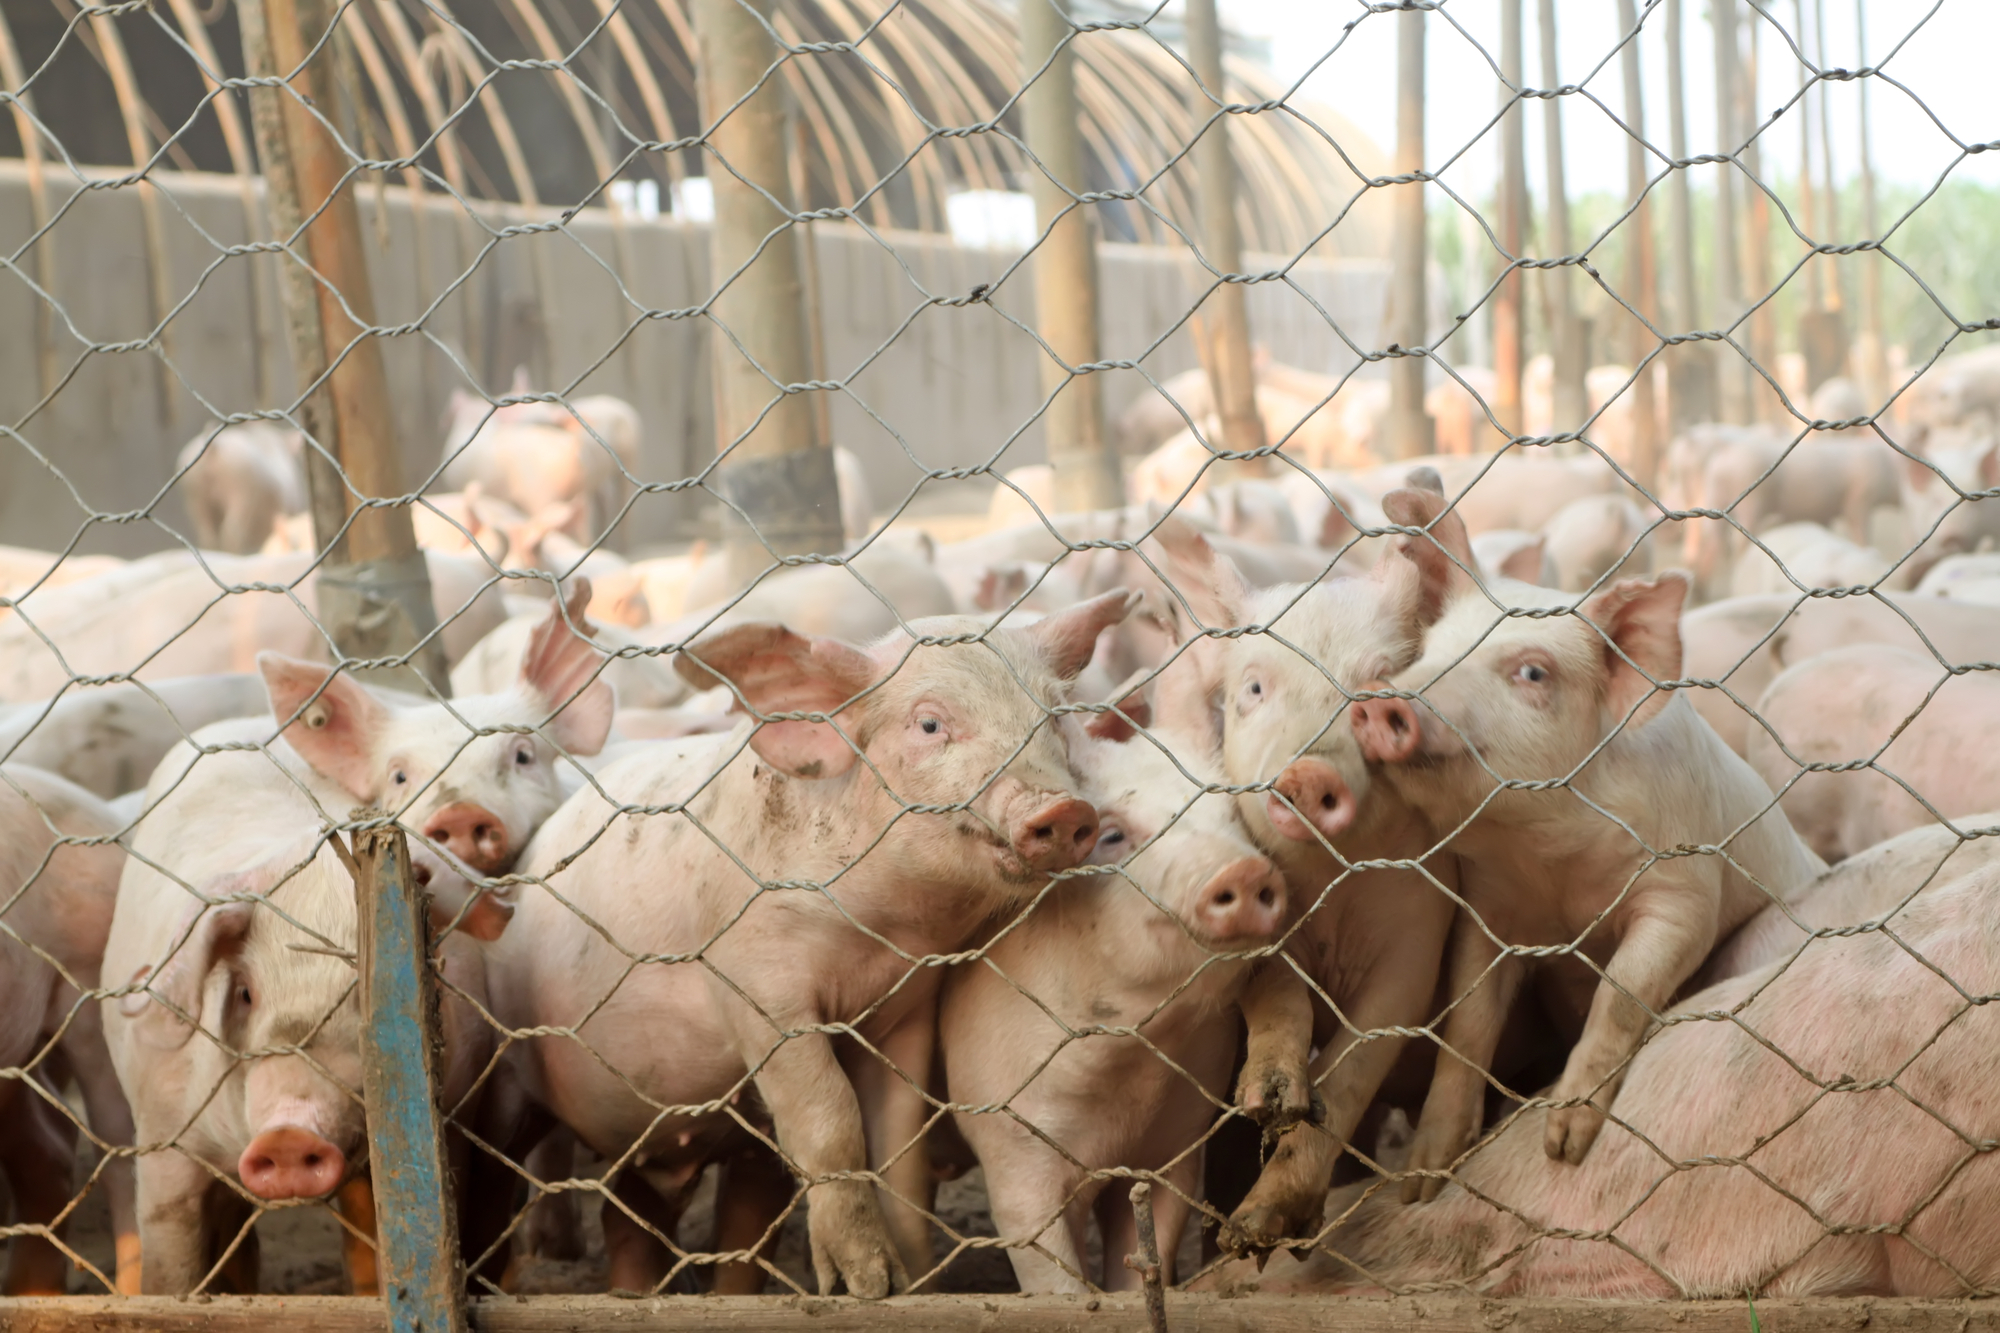 photograph of pigs vying to look out of chain-link pen